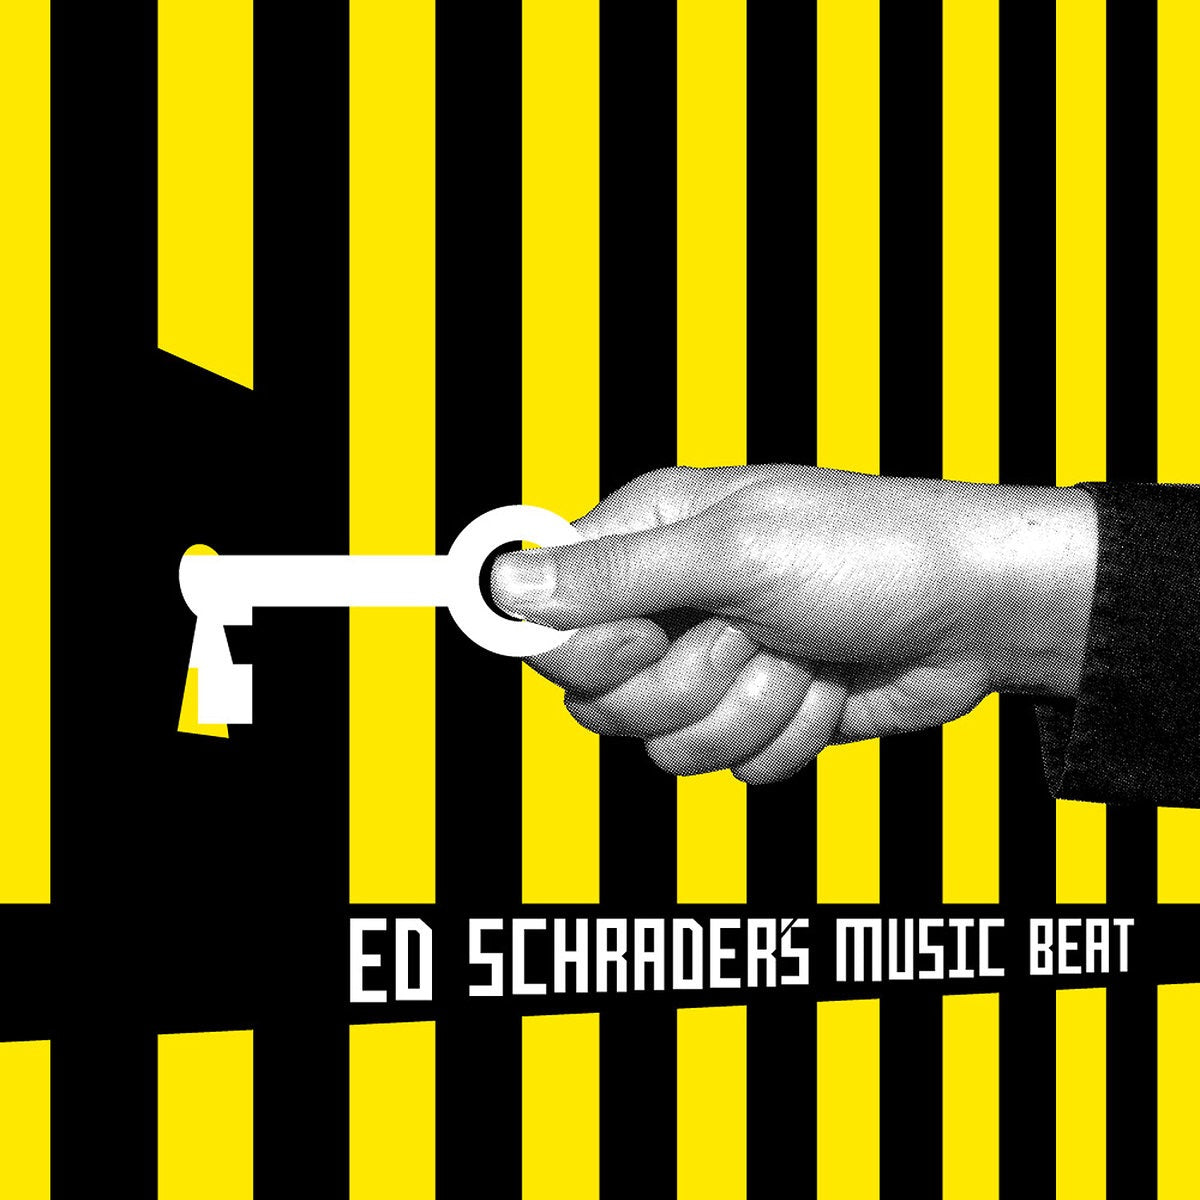 Ed Schraders Music Beat - Party Jail